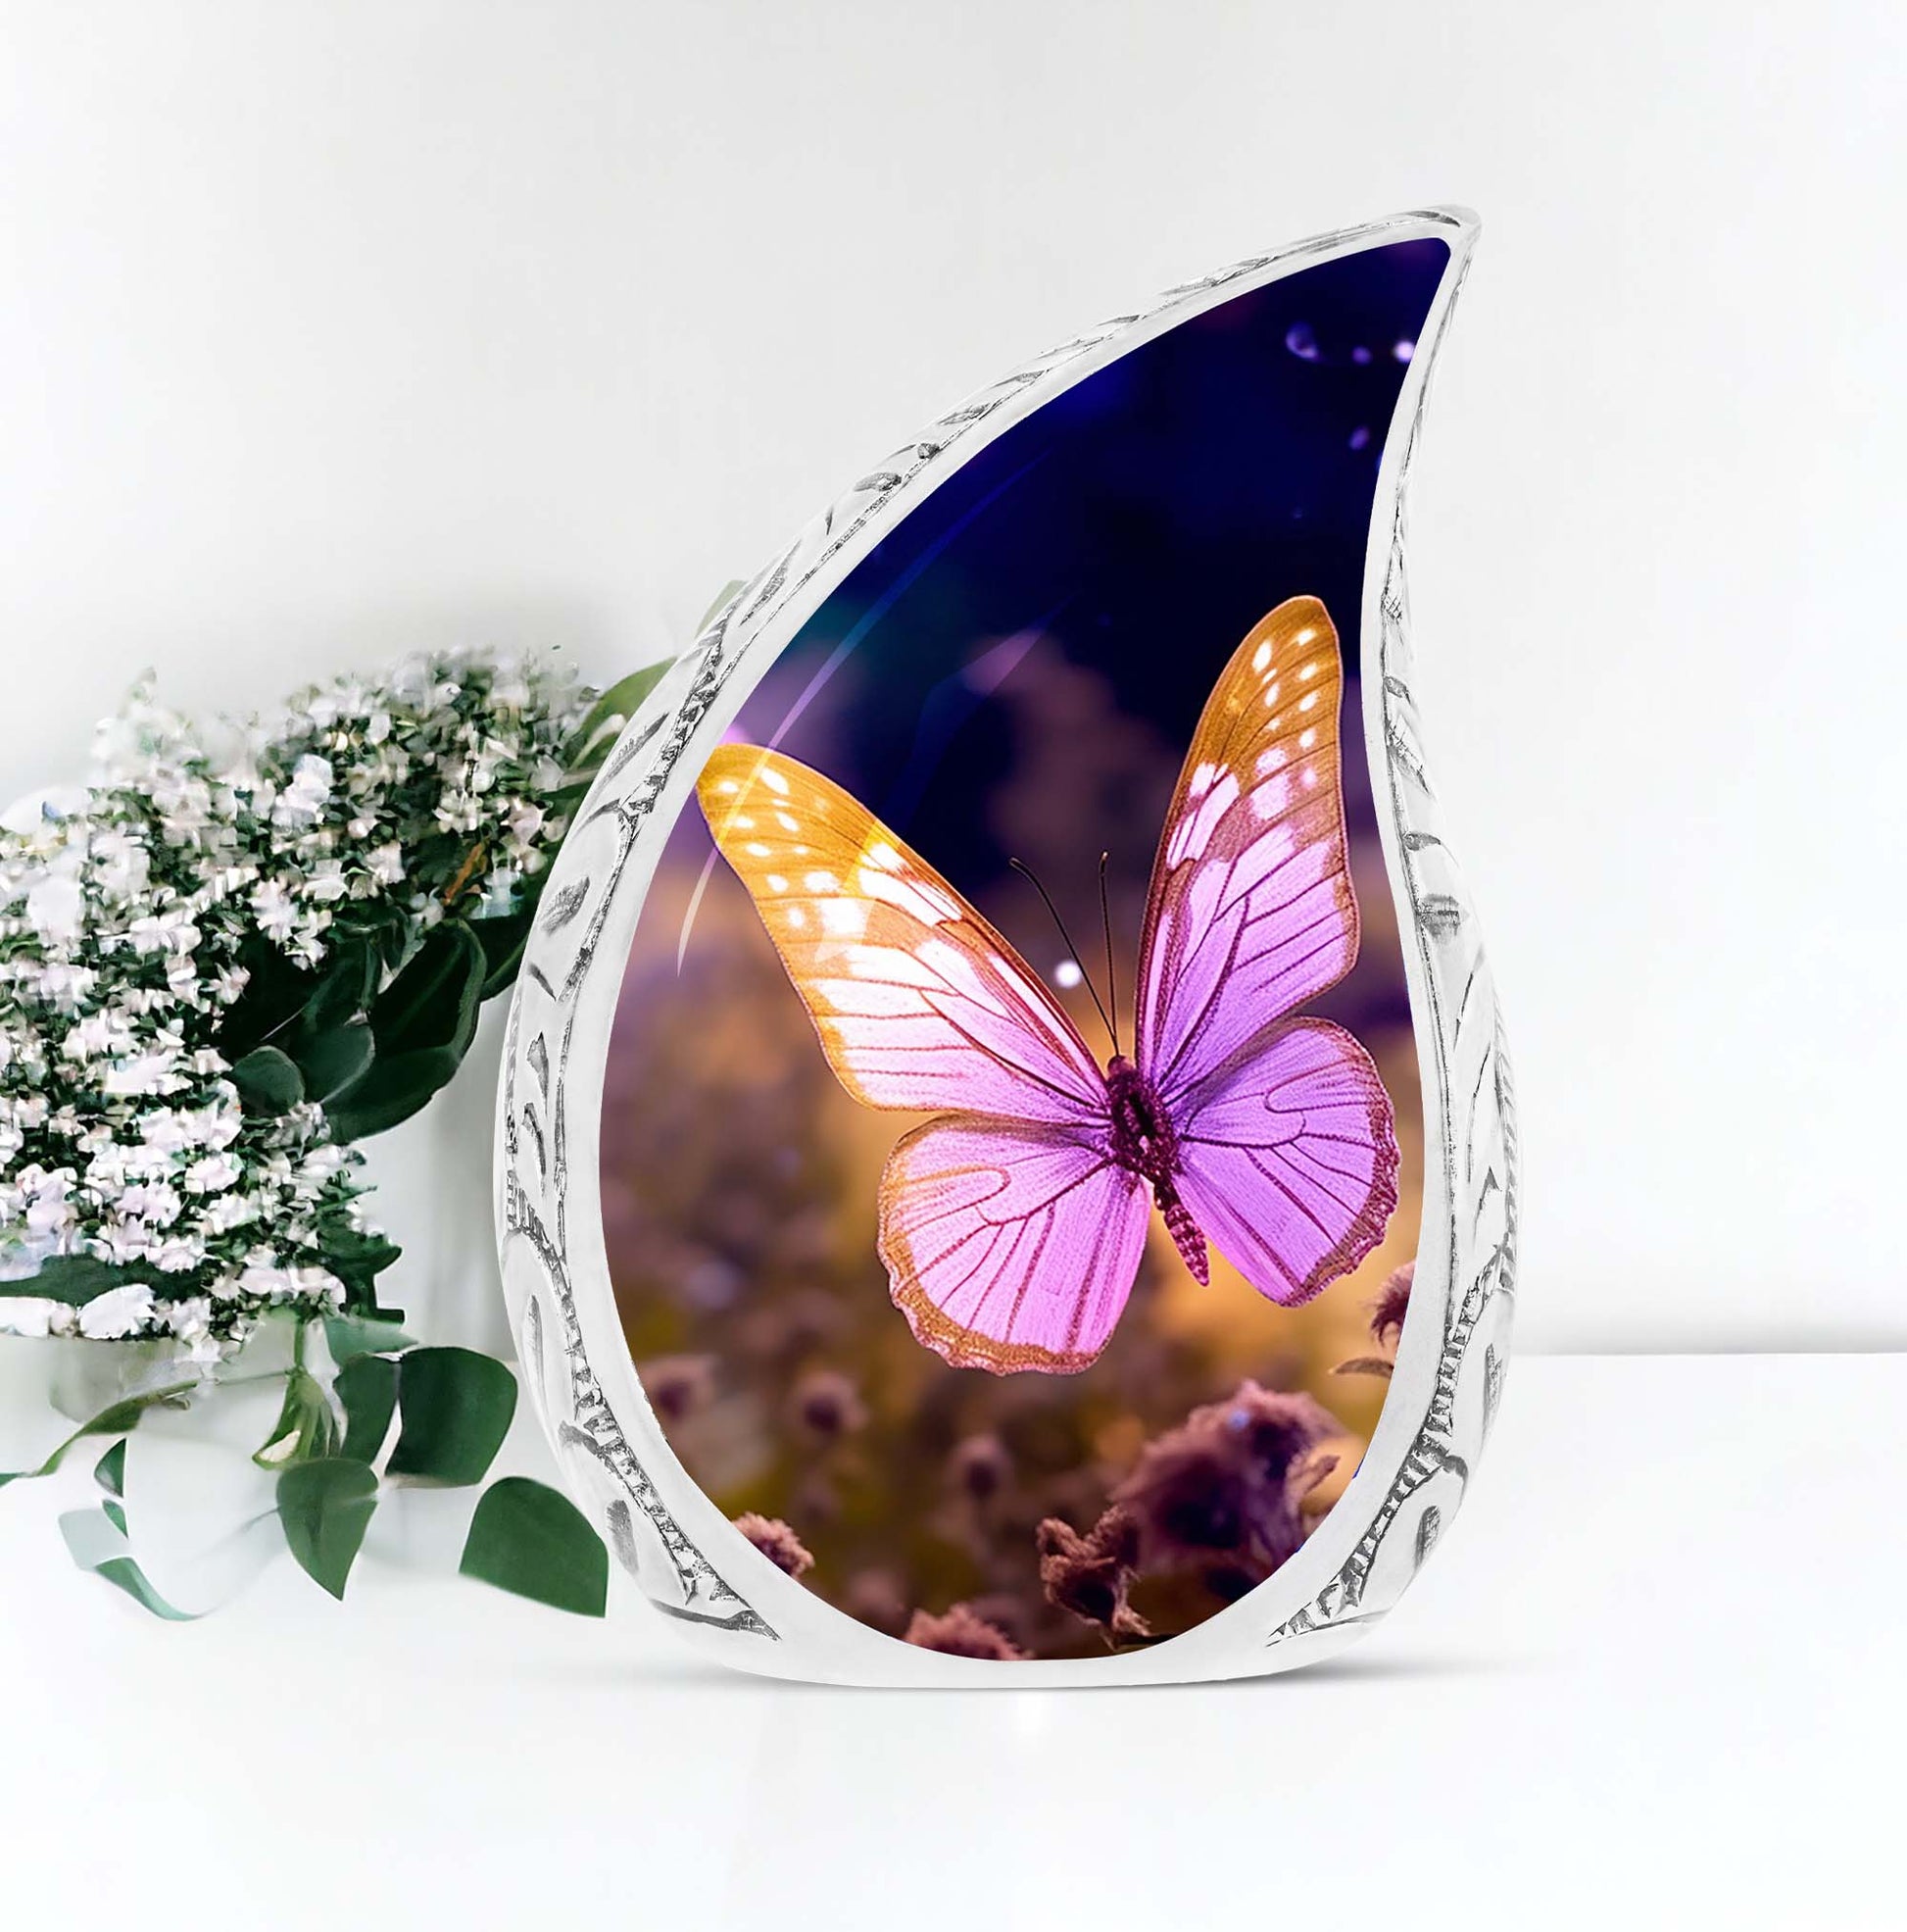 Large, decorative cremation urn for adult ashes with a beautiful butterfly design